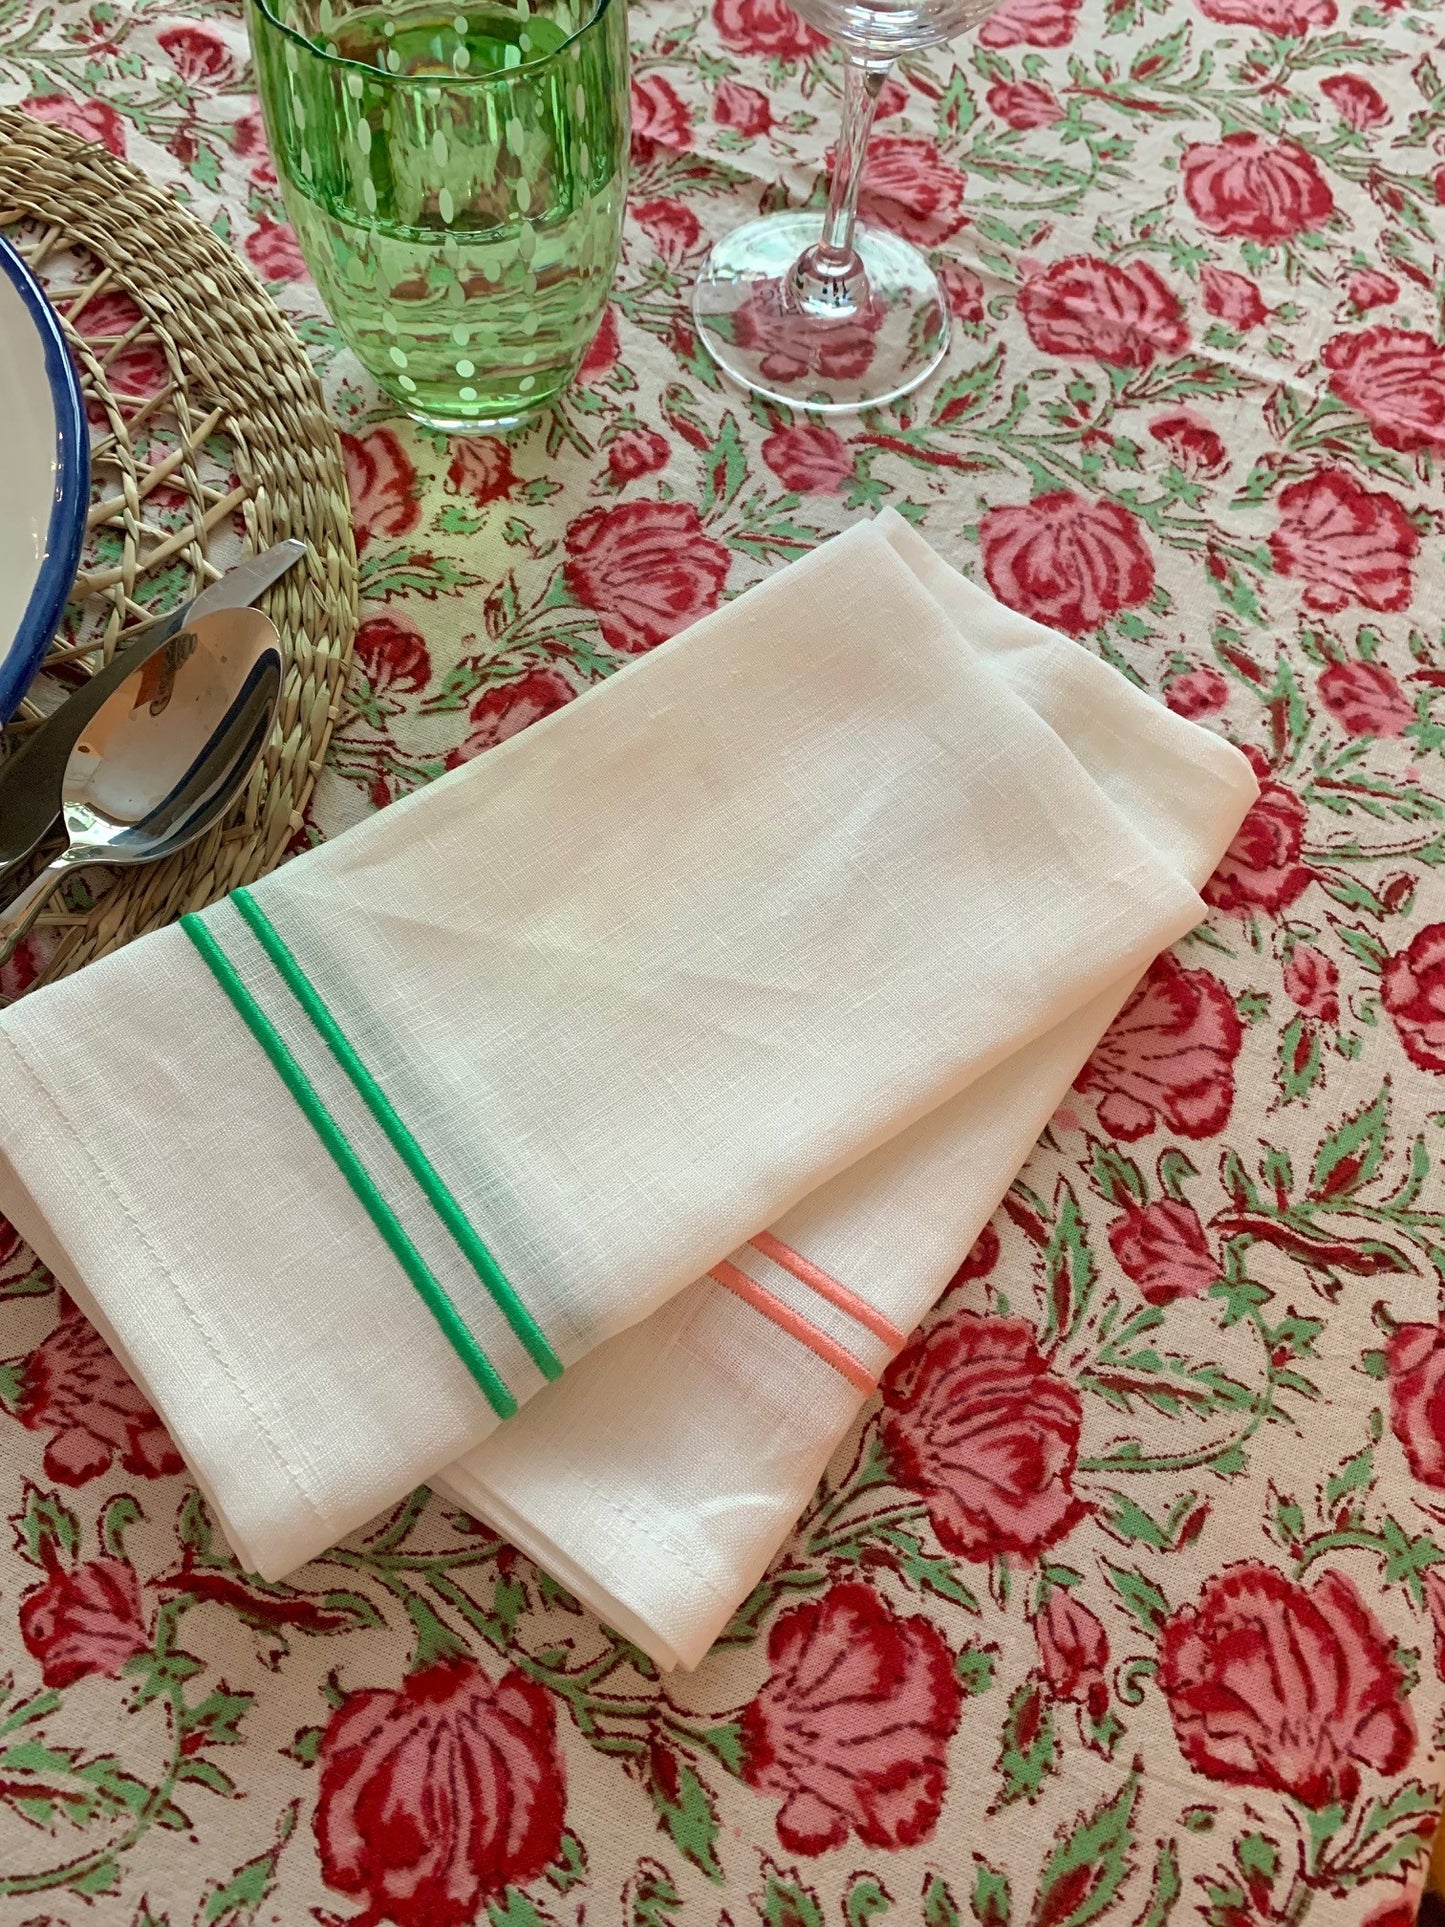 Some white linen napkins with green and pink piping on a green and pink floral block printed tablecloth.